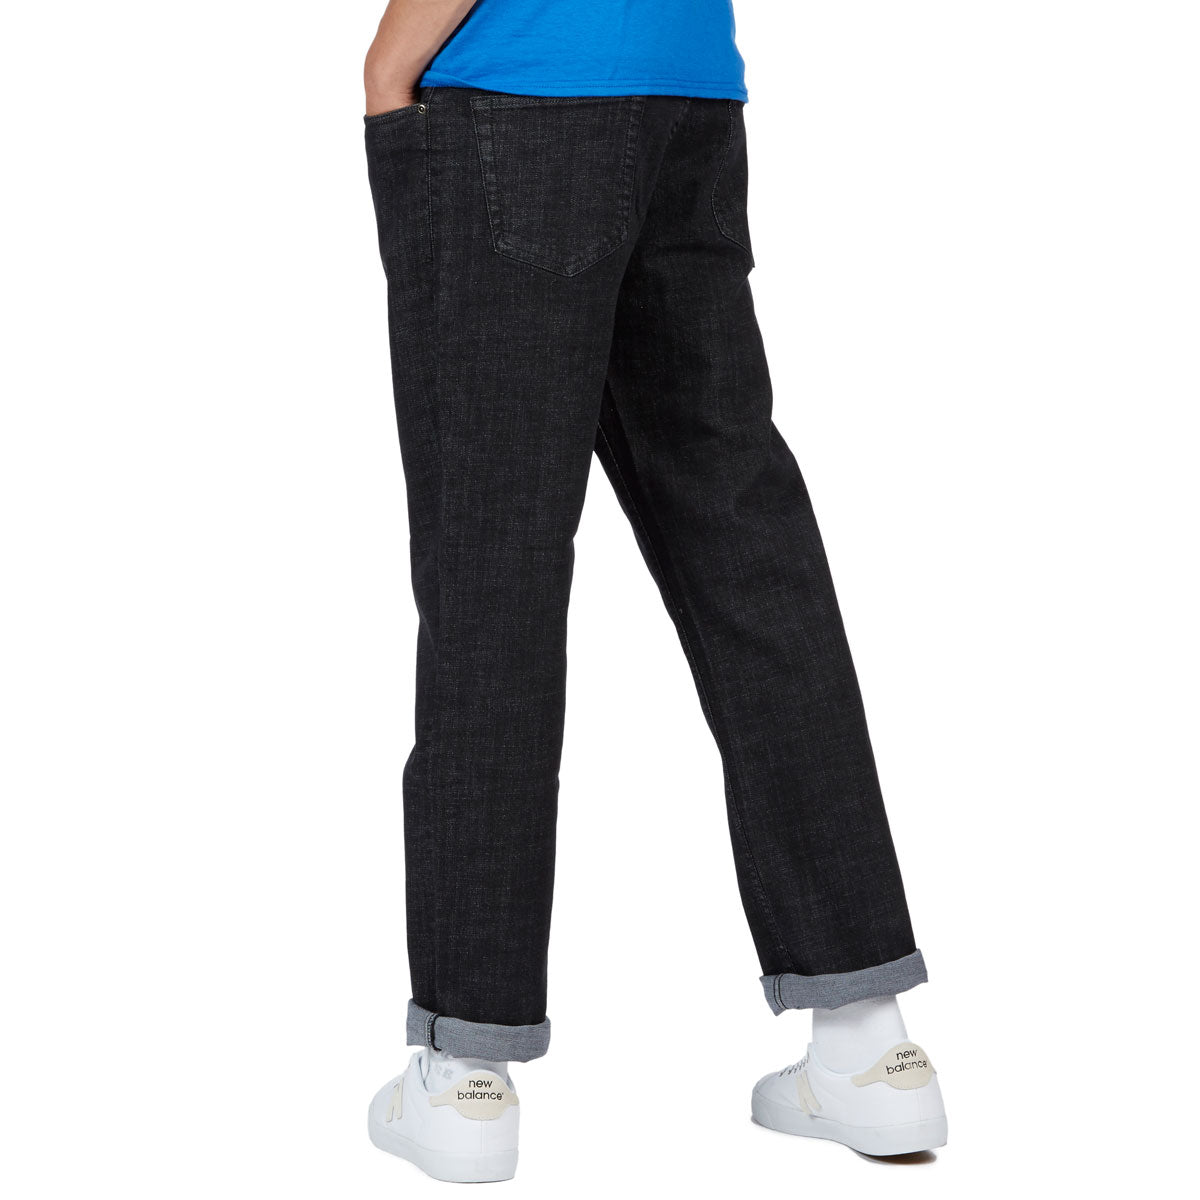 CCS Relaxed Fit Jeans - Washed Black image 3